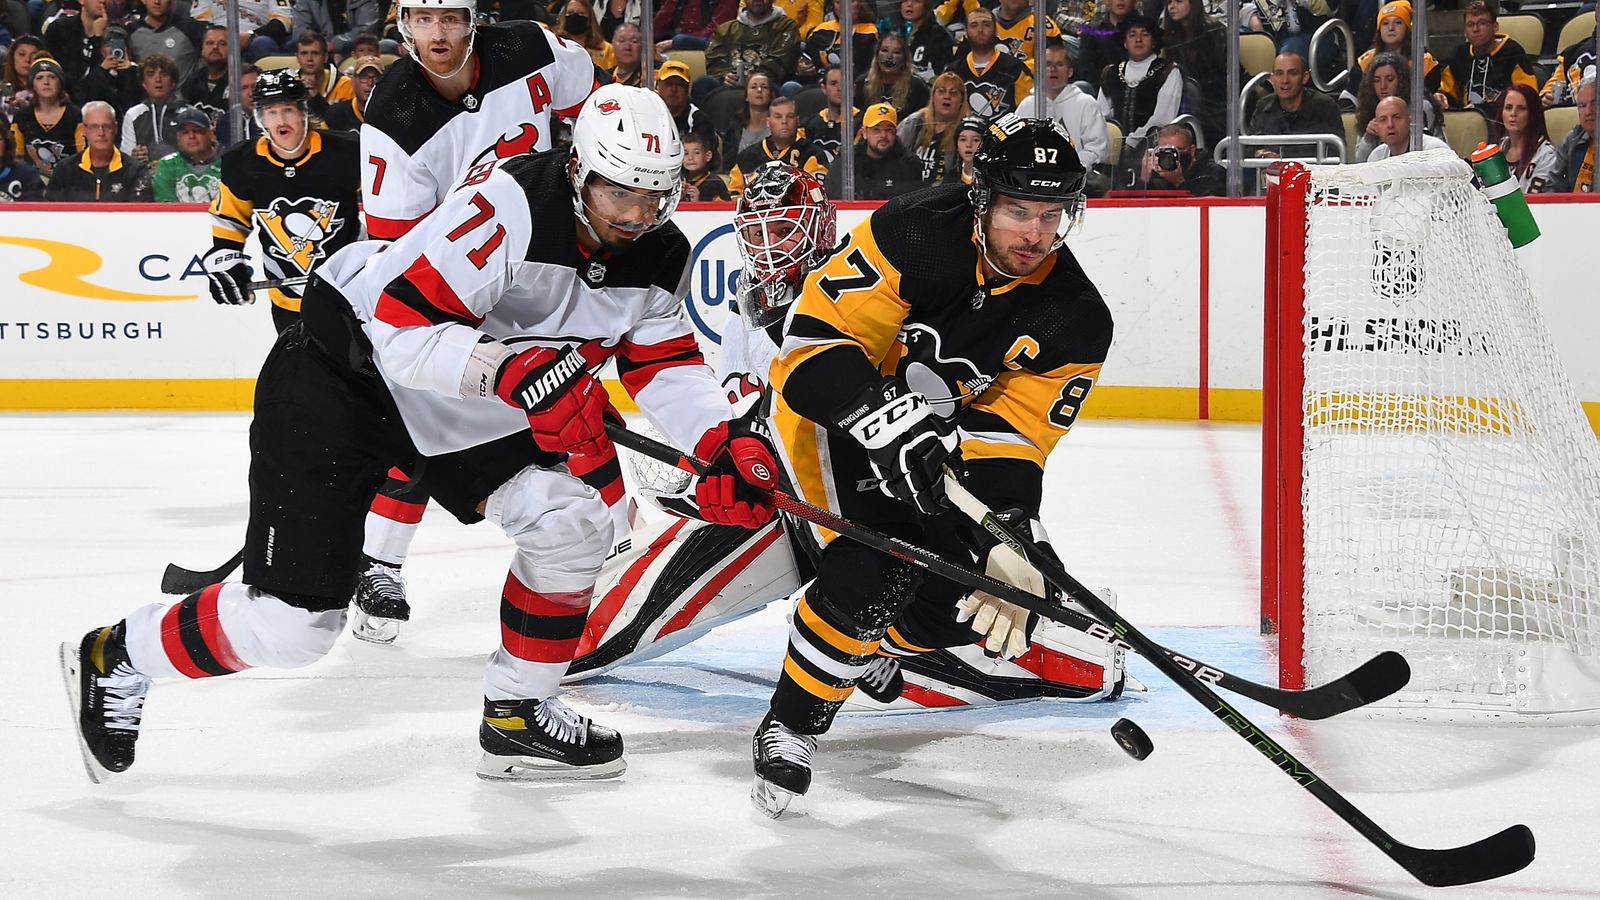 Penguins best Devils with goals from Rust, Guentzel, Aston-Reese